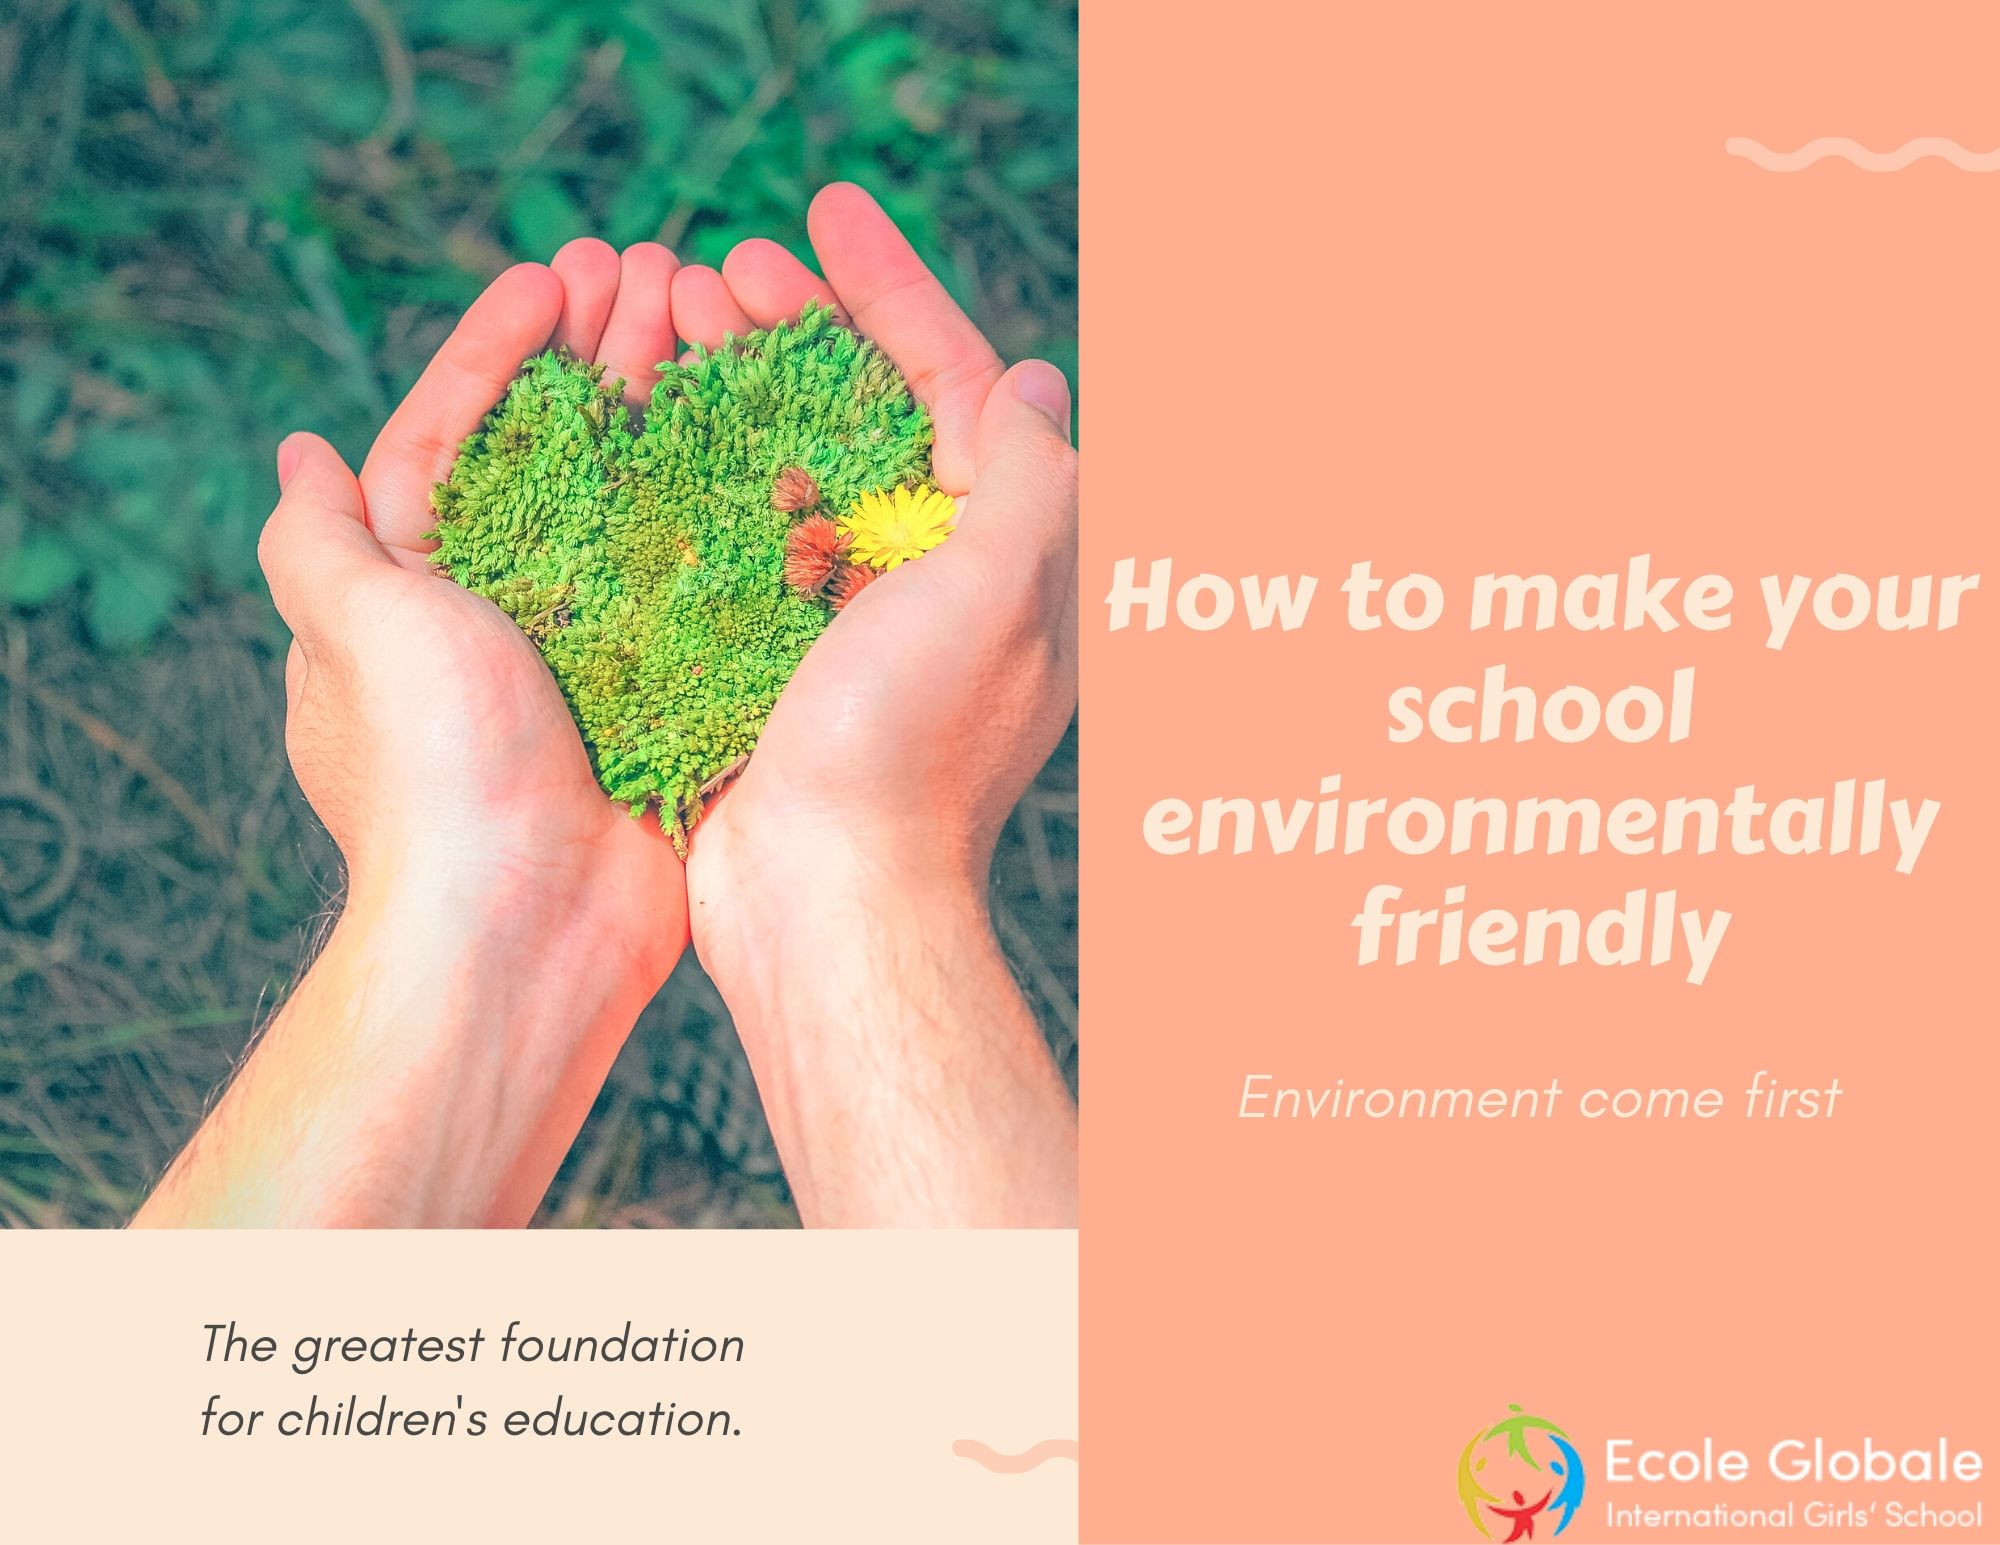 How to make your school environment-friendly